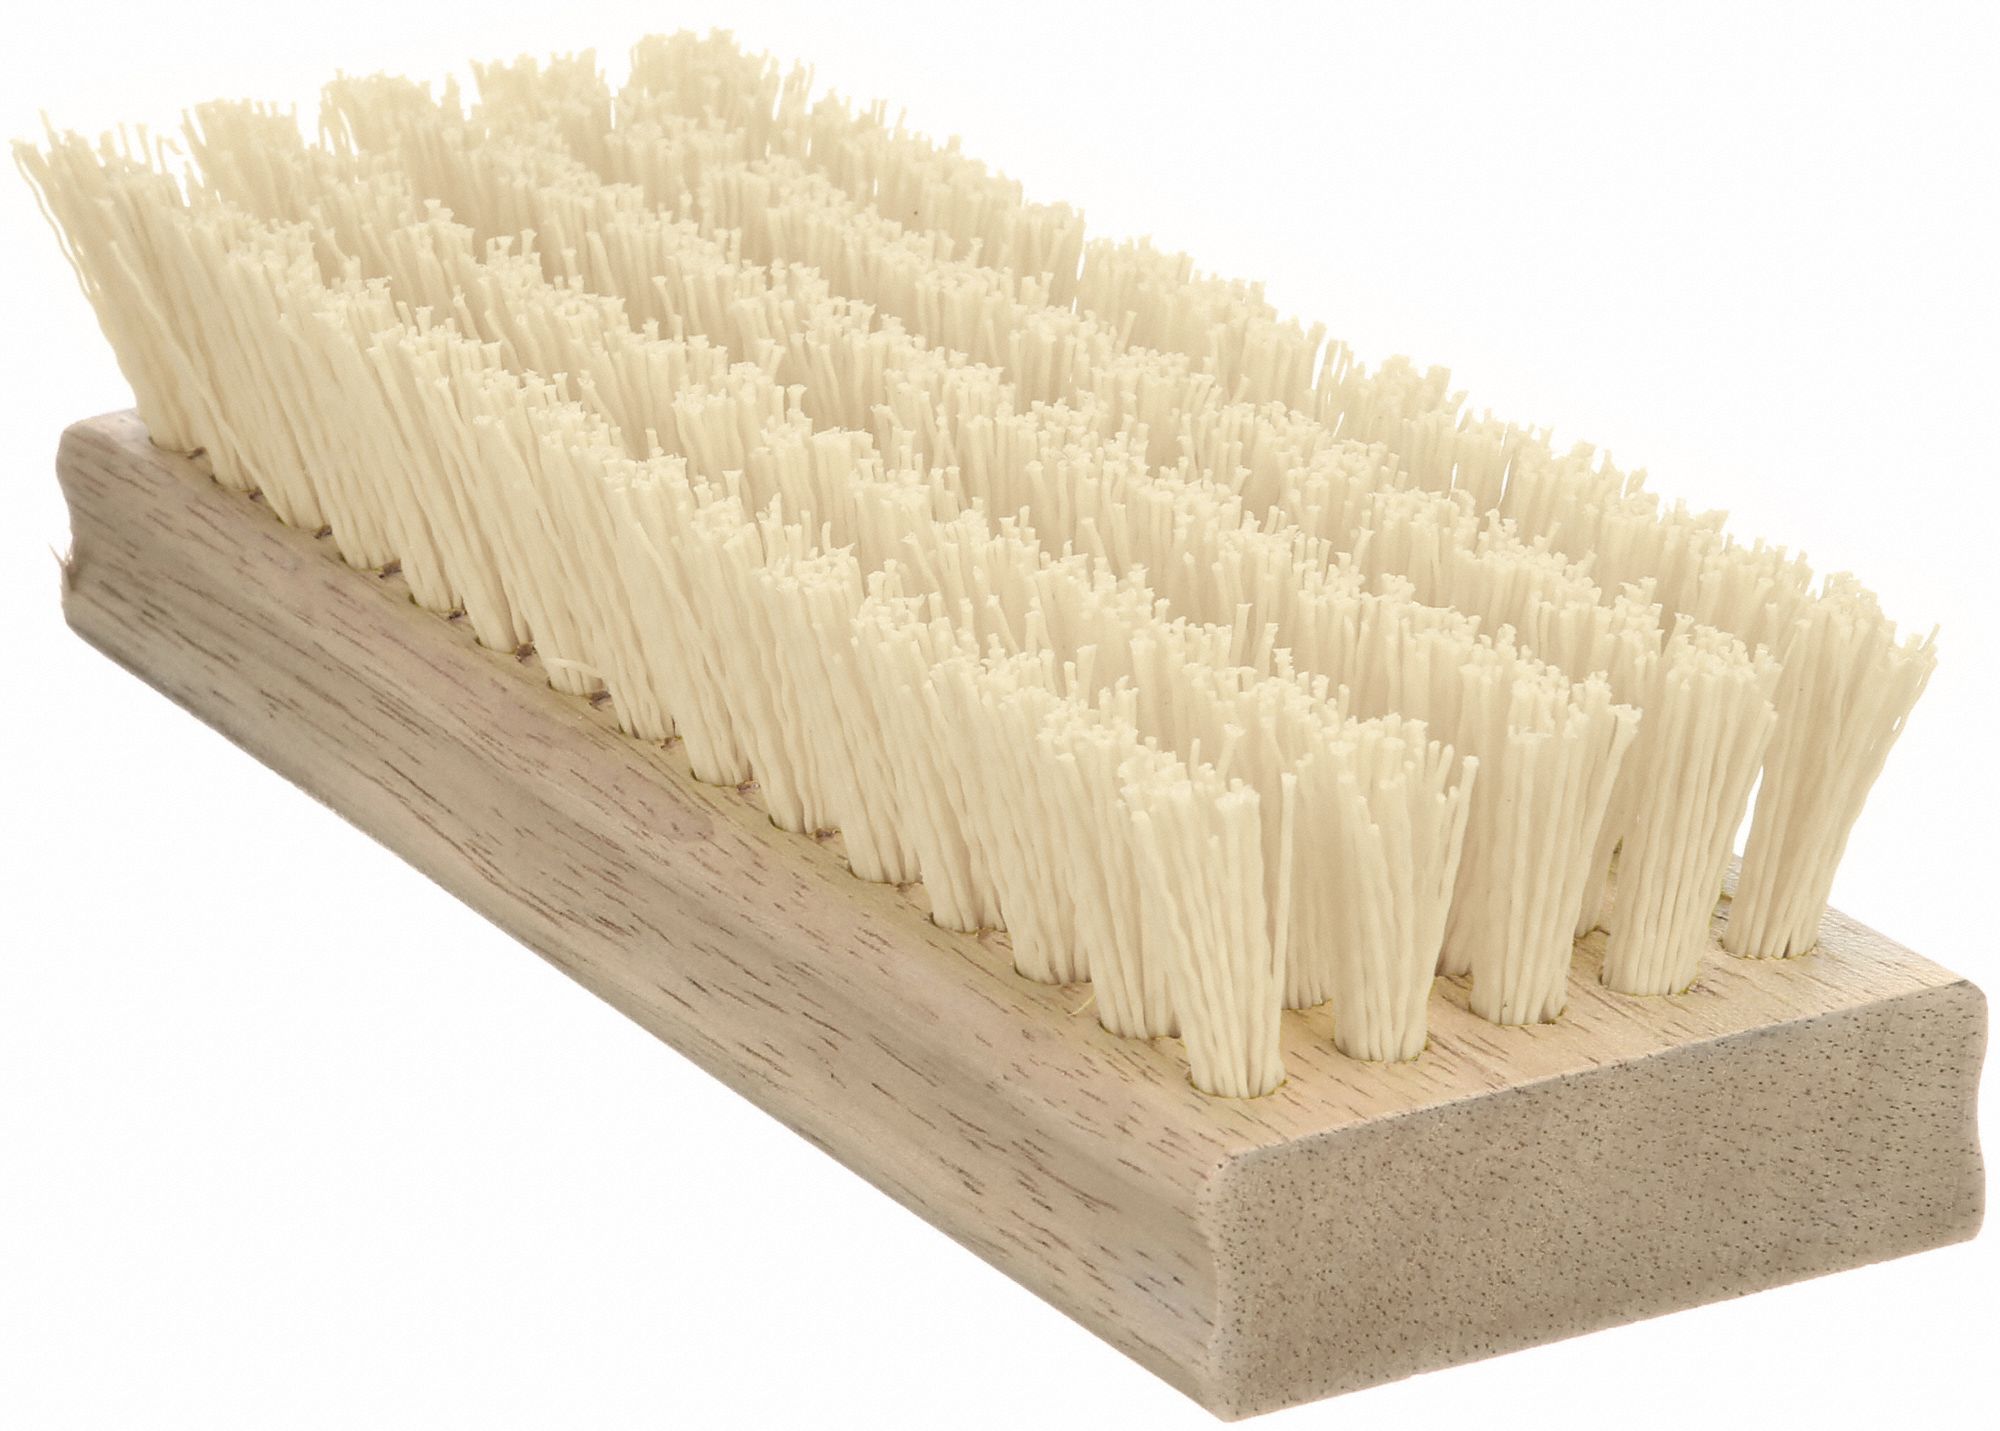 NEW WOODEN SCRUBBING BRUSH DESIGNED WITH HARD STIFF BRISTLES REMOVES STAINES 